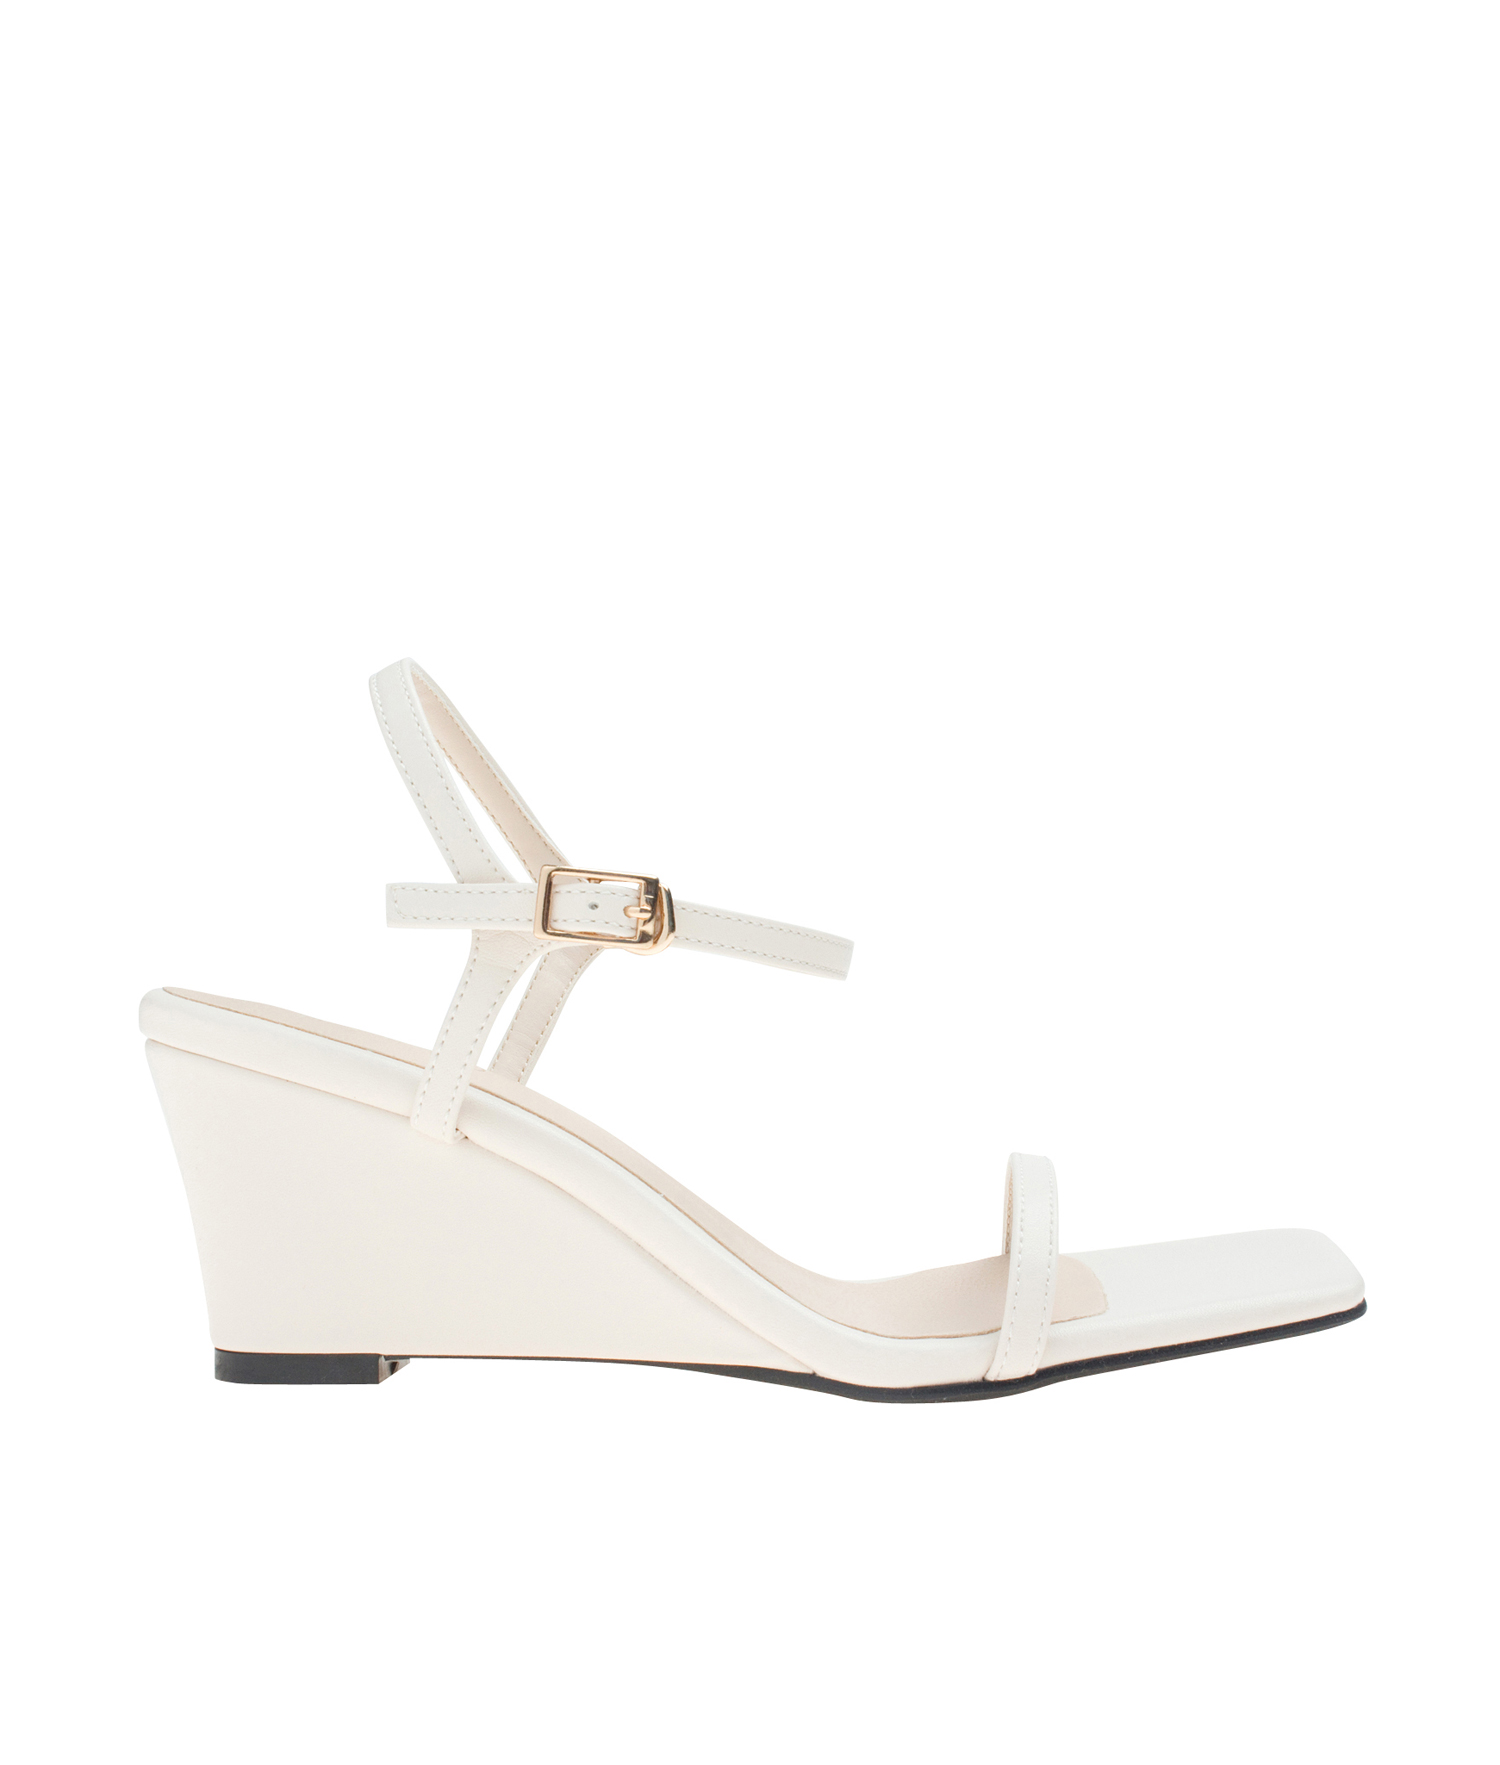 Remikstyt Womens Wedge Sandals Ankle Strap White 